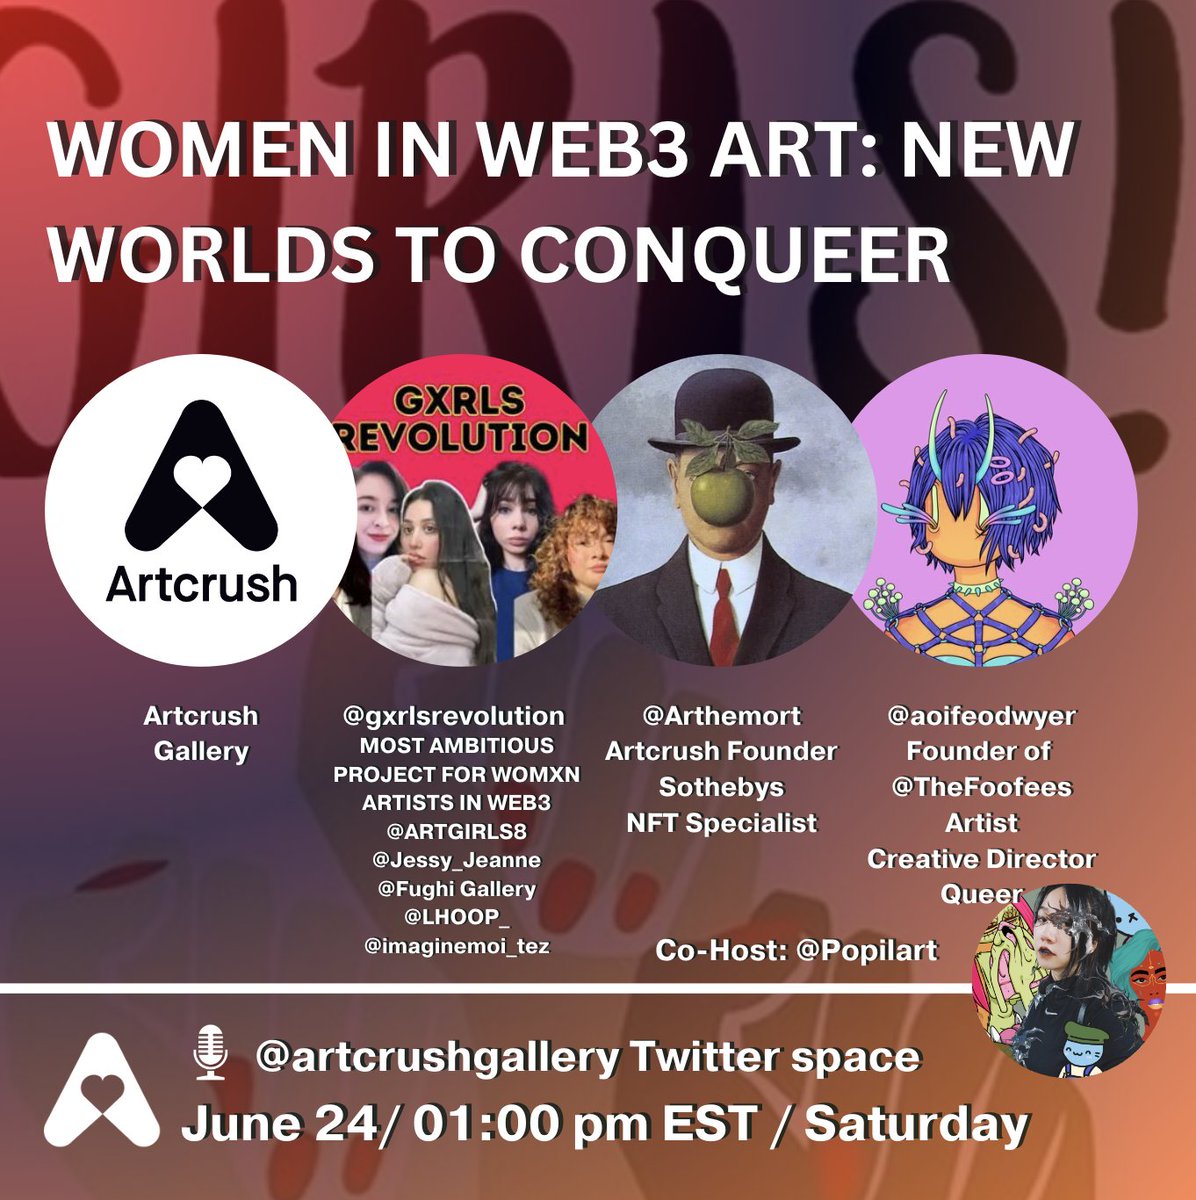 THIS SATURDAY, at 10AM PST / 1PM EST / 7PM CET, we're honored to welcome @gxrlsrevolution, @aoifeodwyer & @popilart to explore the NEW WORLDS TO CONQUEER IN WEB3 🌏🪐

JOIN US TO listen to the Stories & discover the Wonders & the Treasures of these FANTASTIC WOMEN IN WEB3 💥🌈